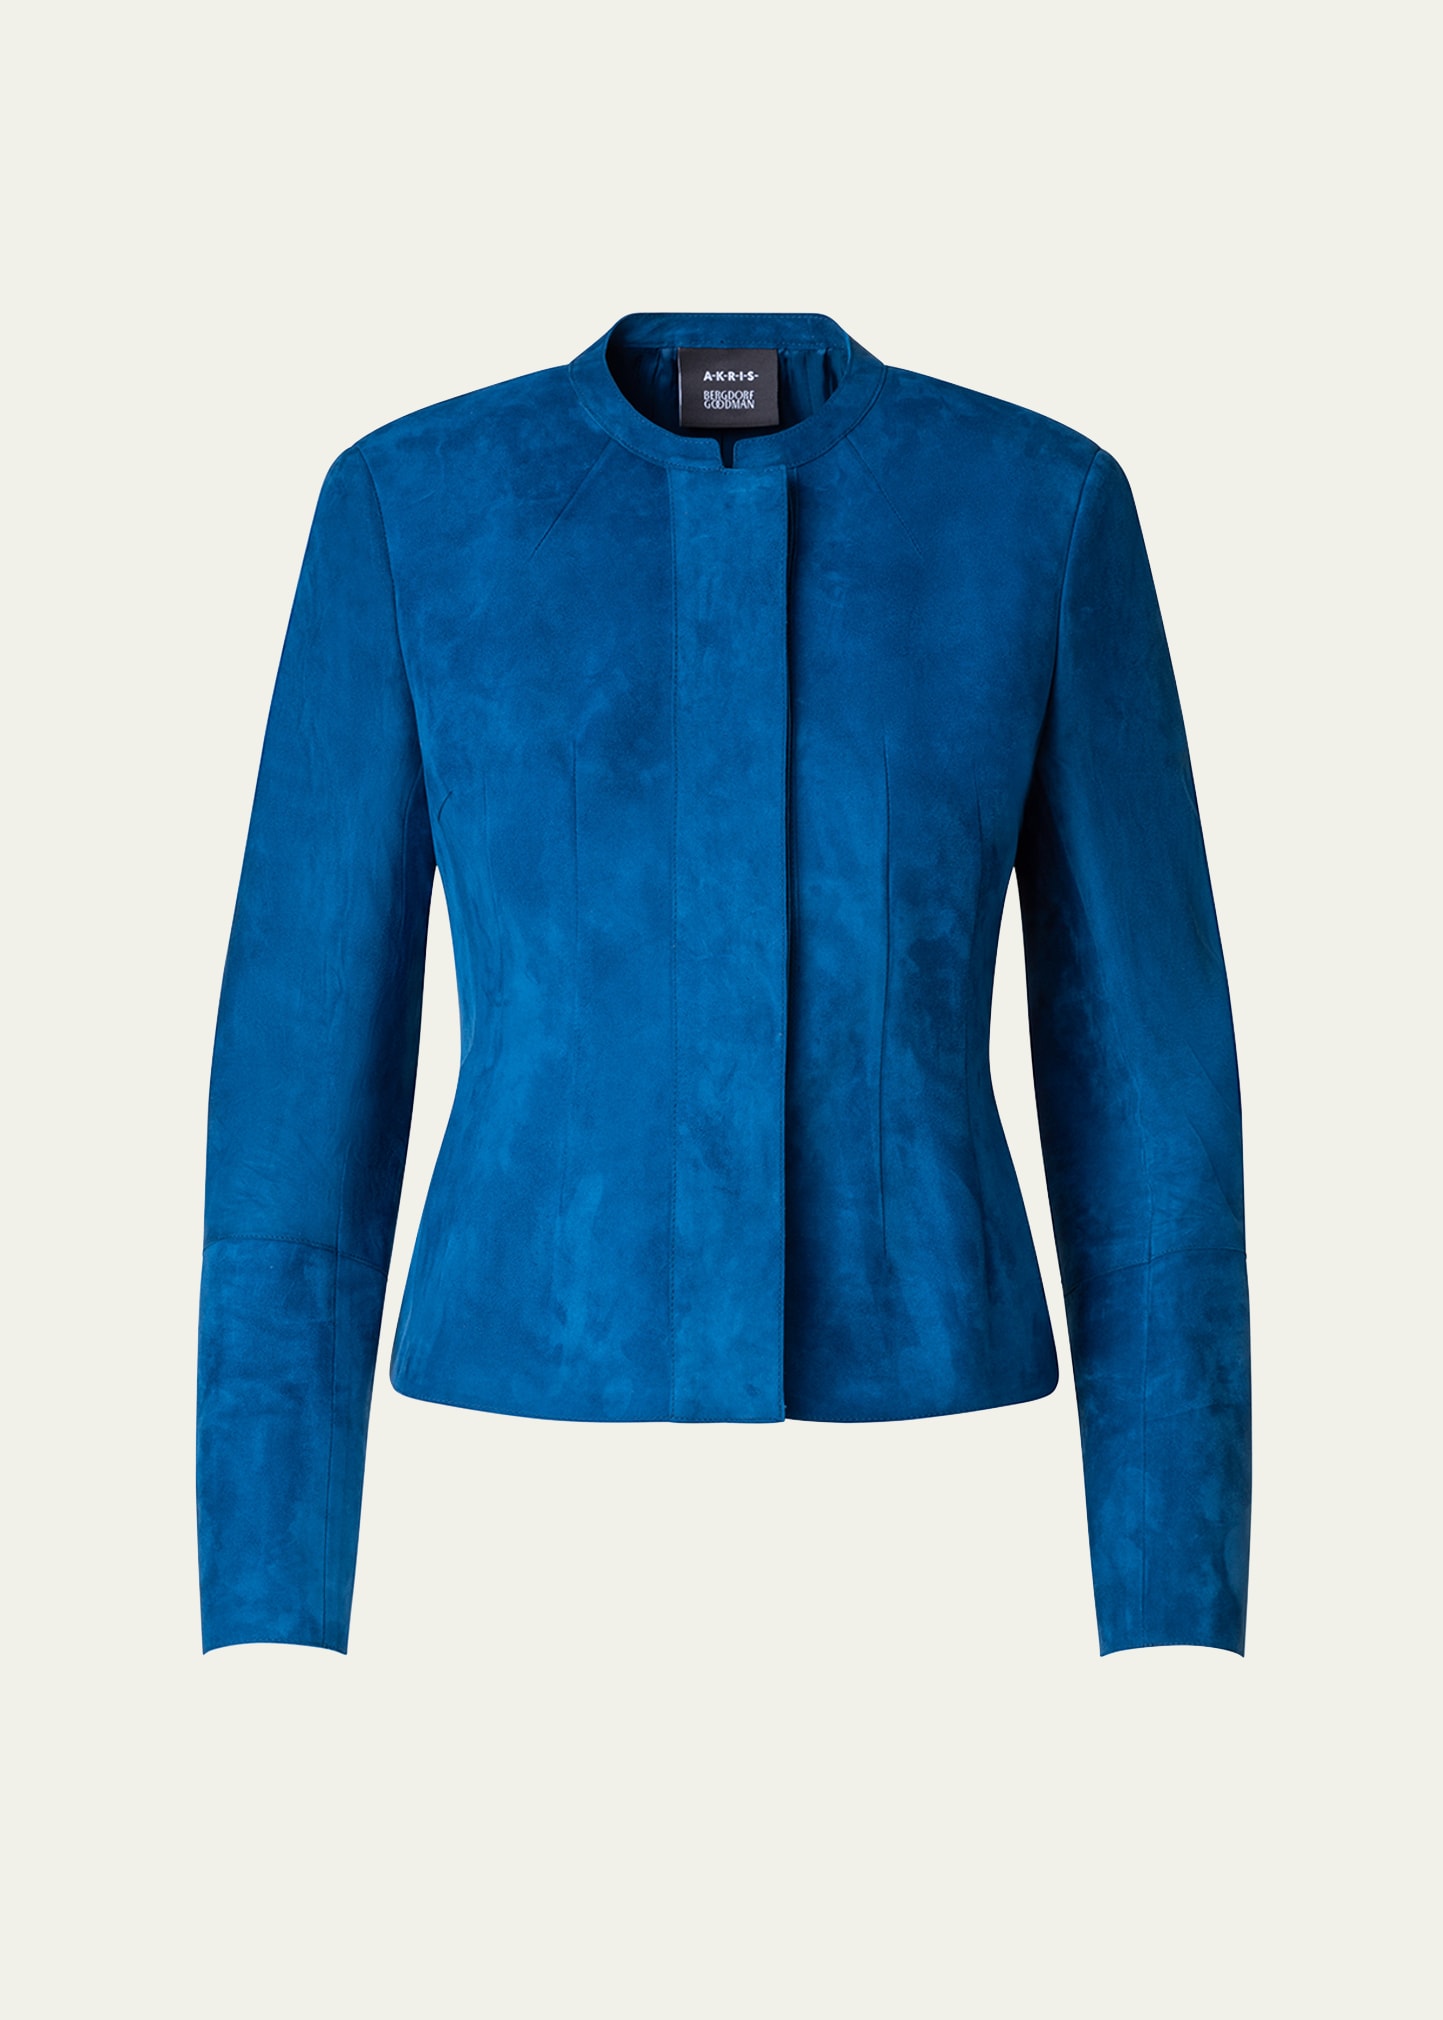 Aniella Suede Fitted Jacket, Blue